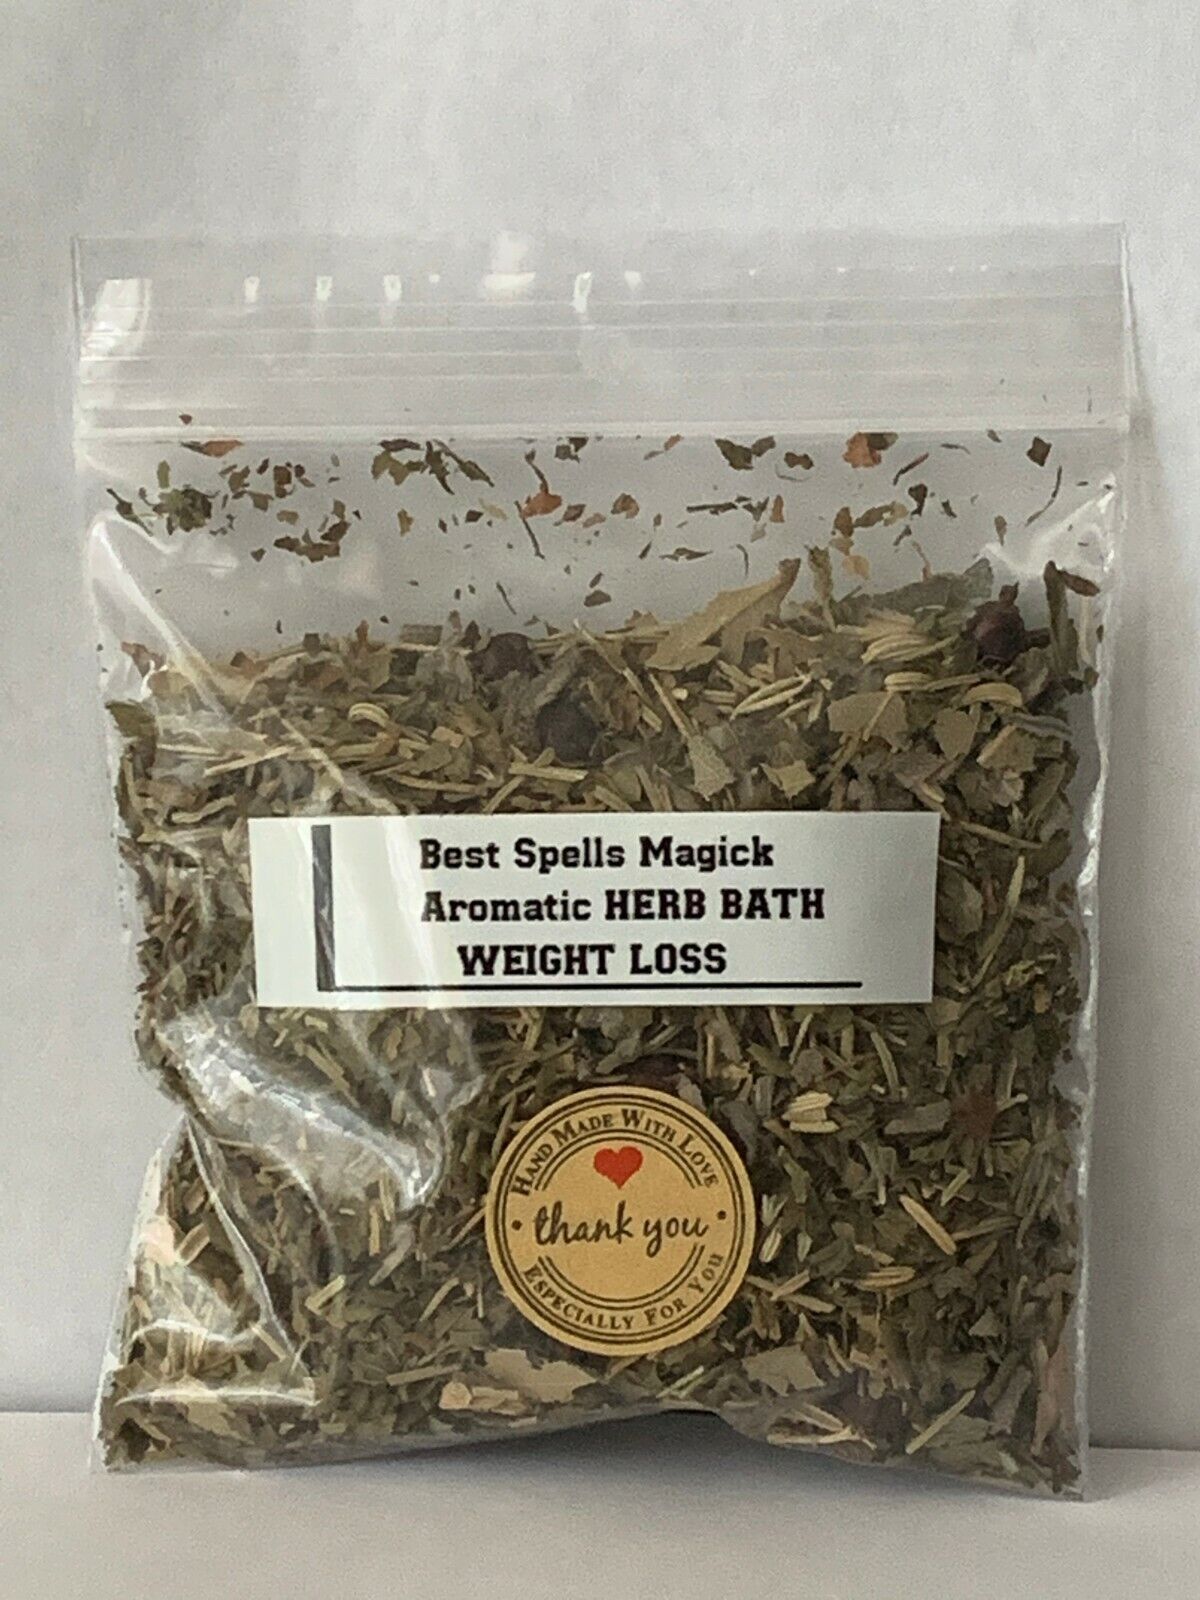 WEIGHT LOSS Aromatic Herbs Spell & Bath/Hand Crafted/Blessed /Best Spells Magick